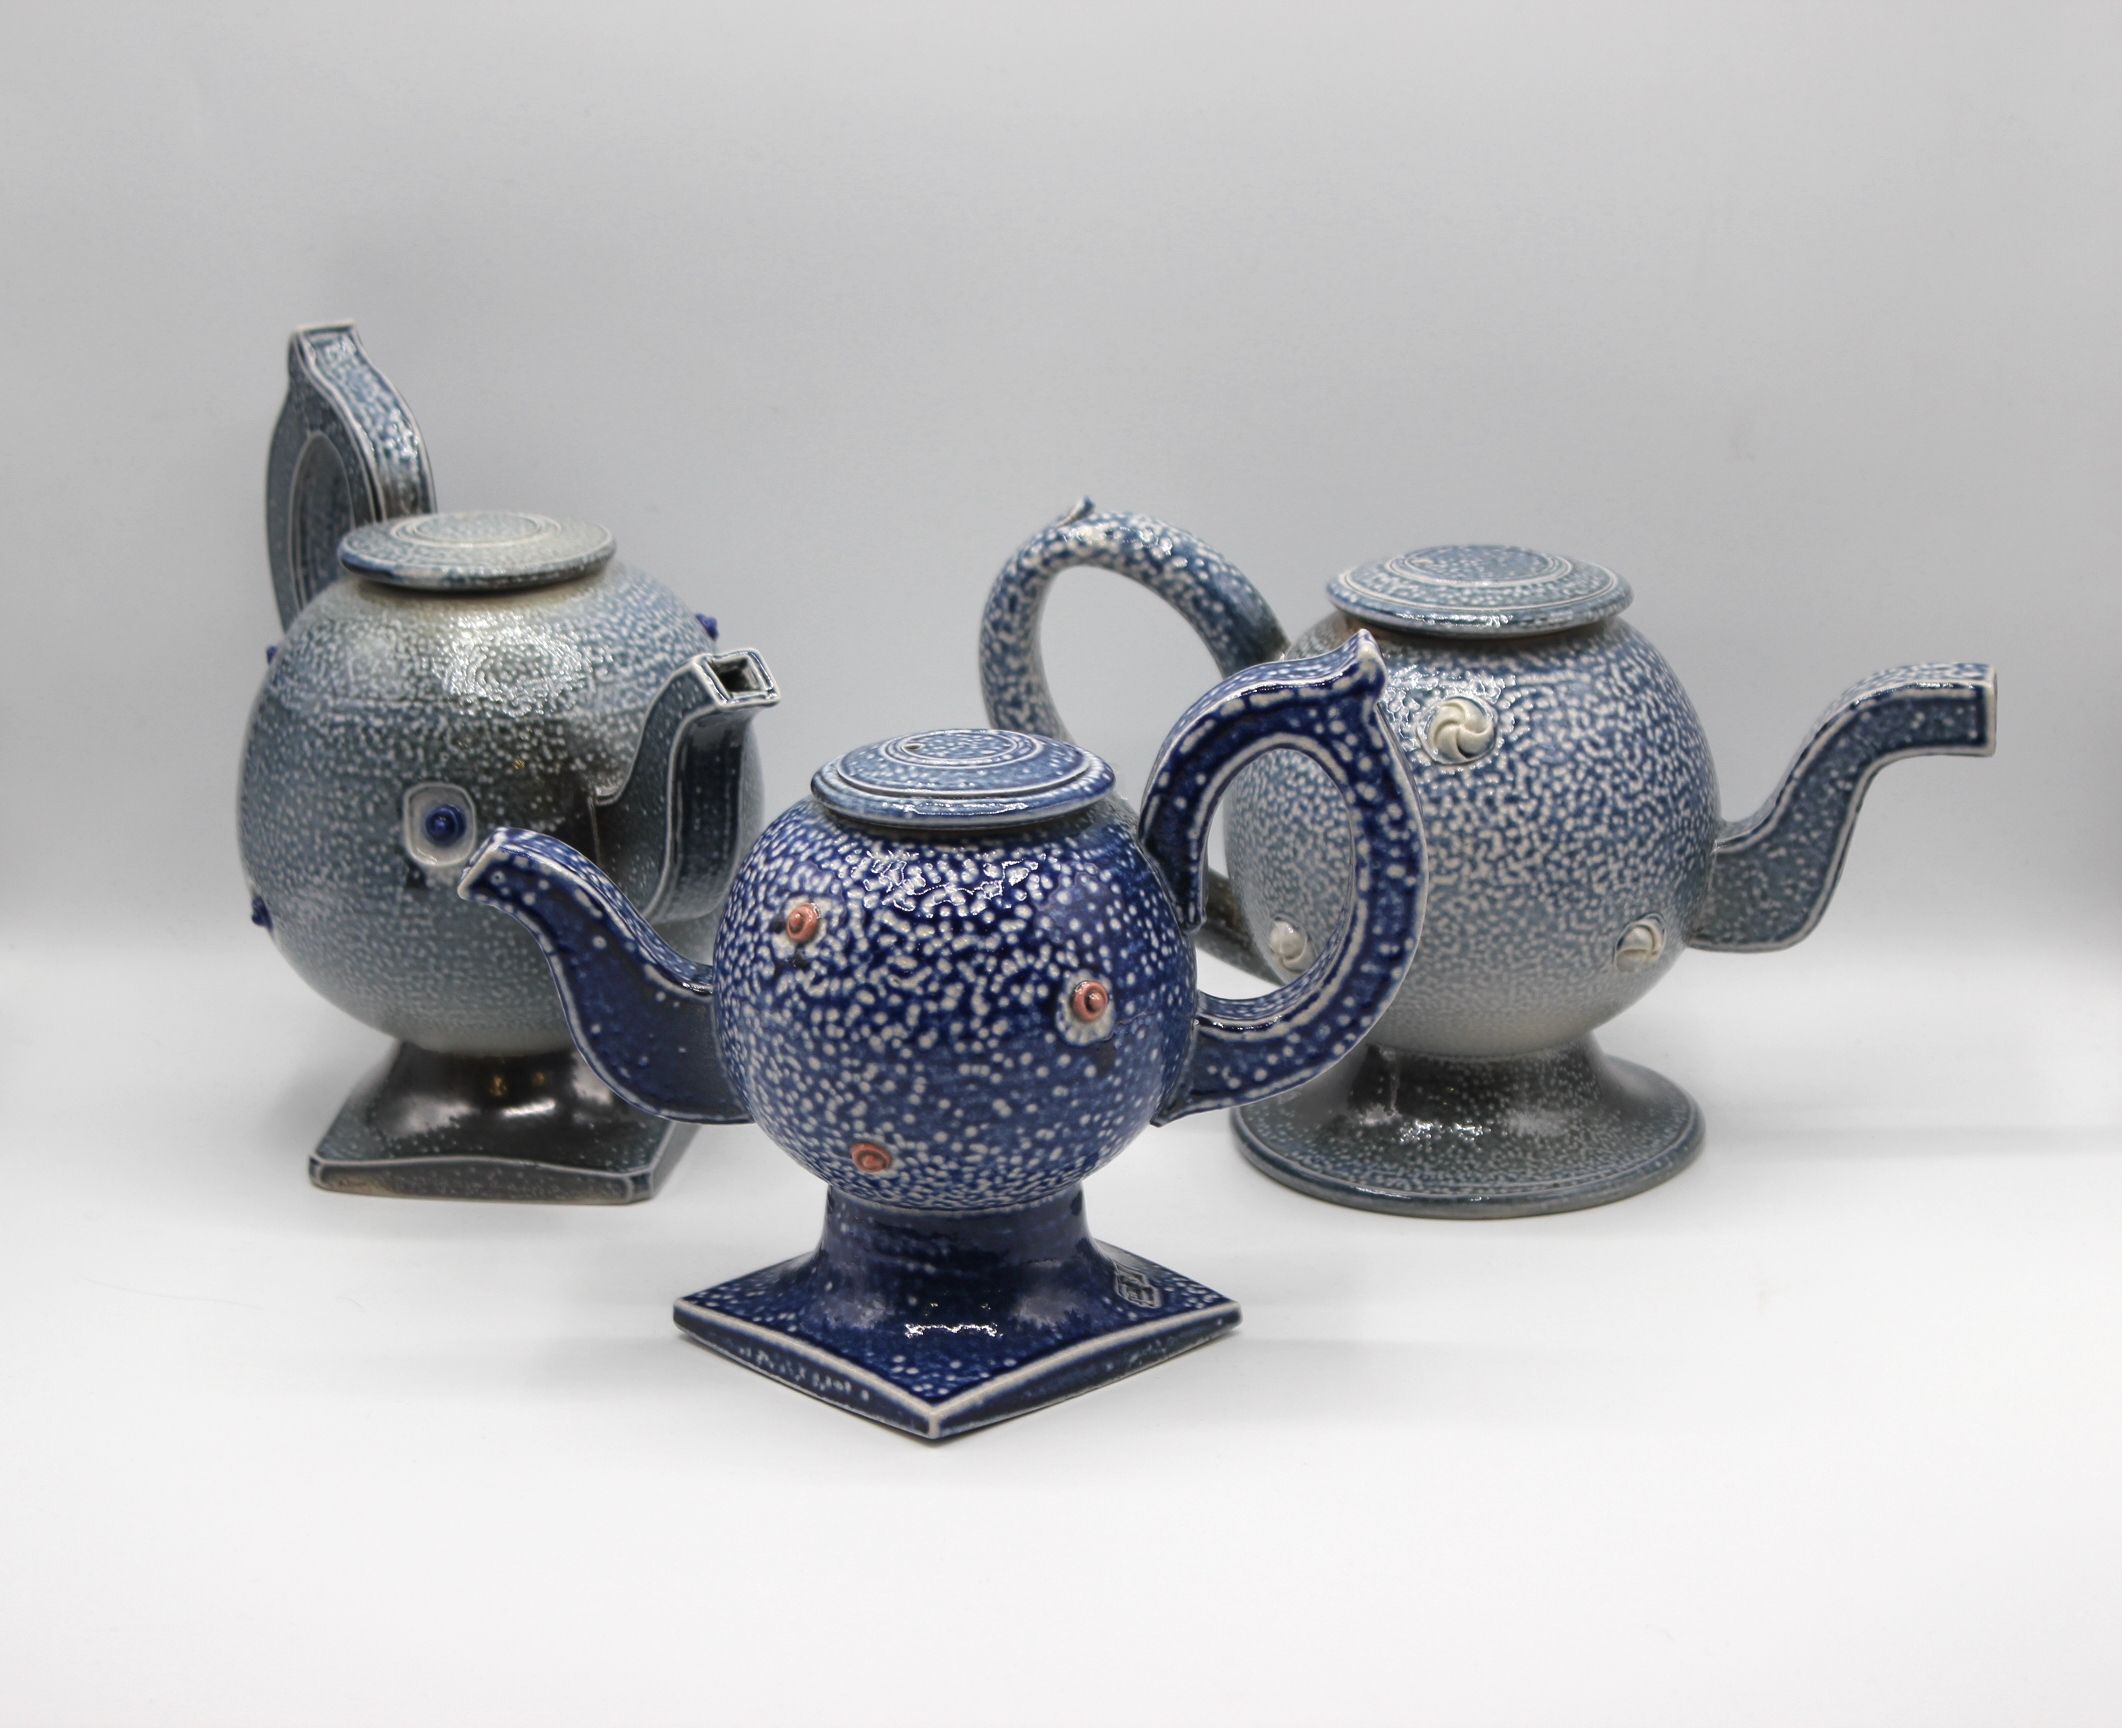 TEA WITH A TWIST: The intriguing ceramic works of Peter Meanley on show at Craft NI